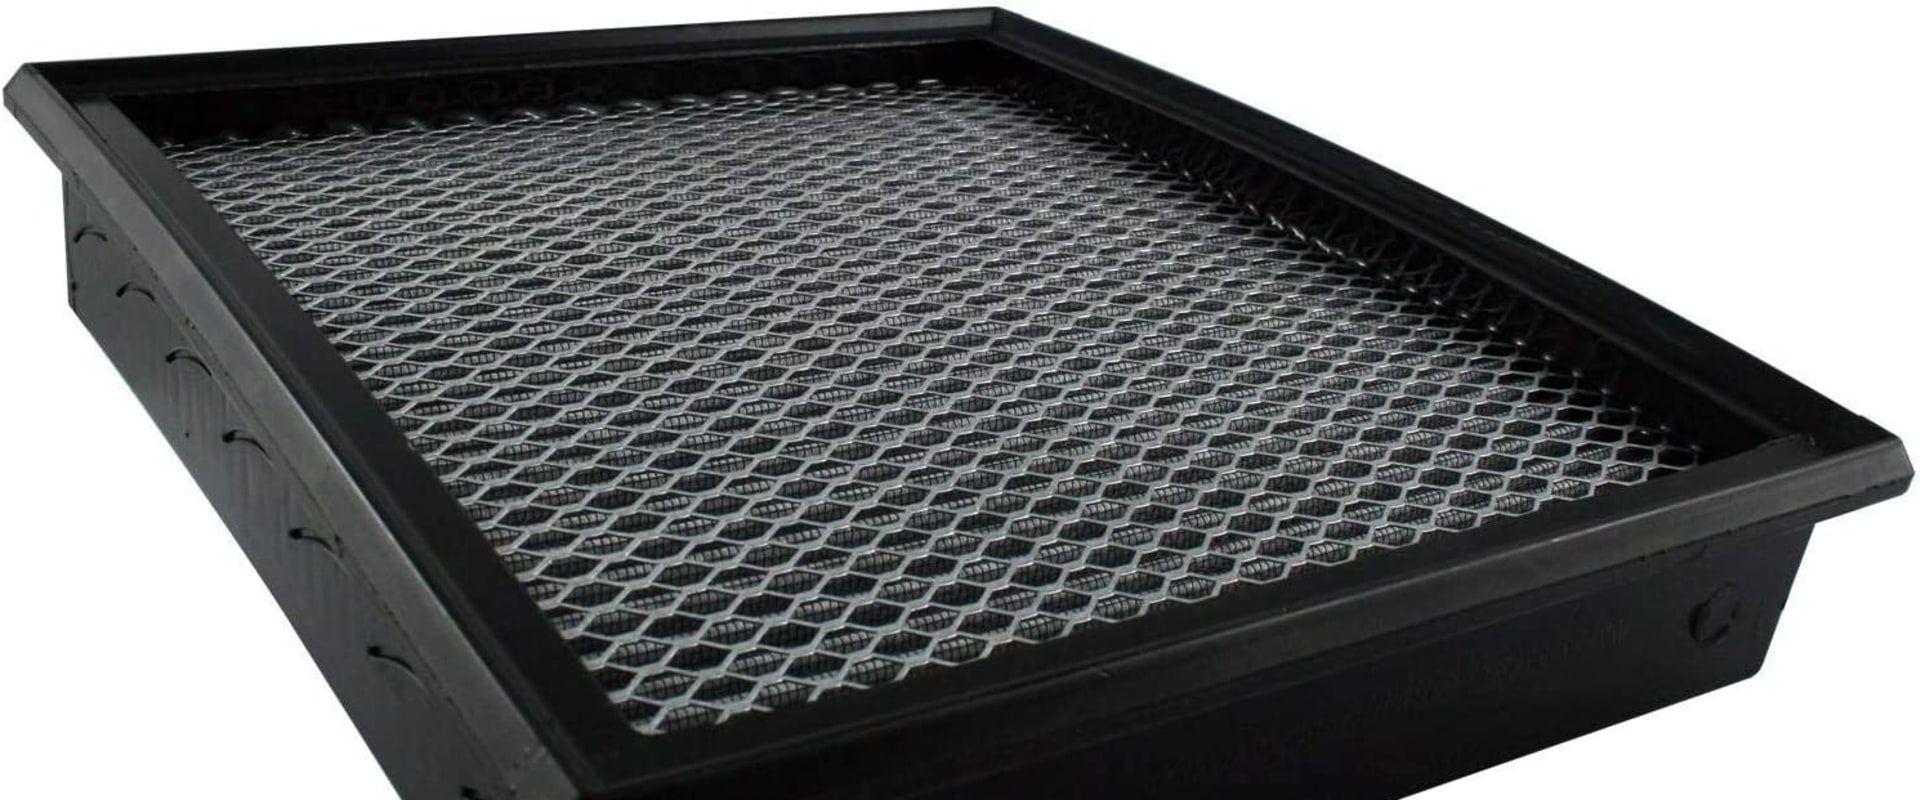 Are Air Filters Covered Under Warranty?